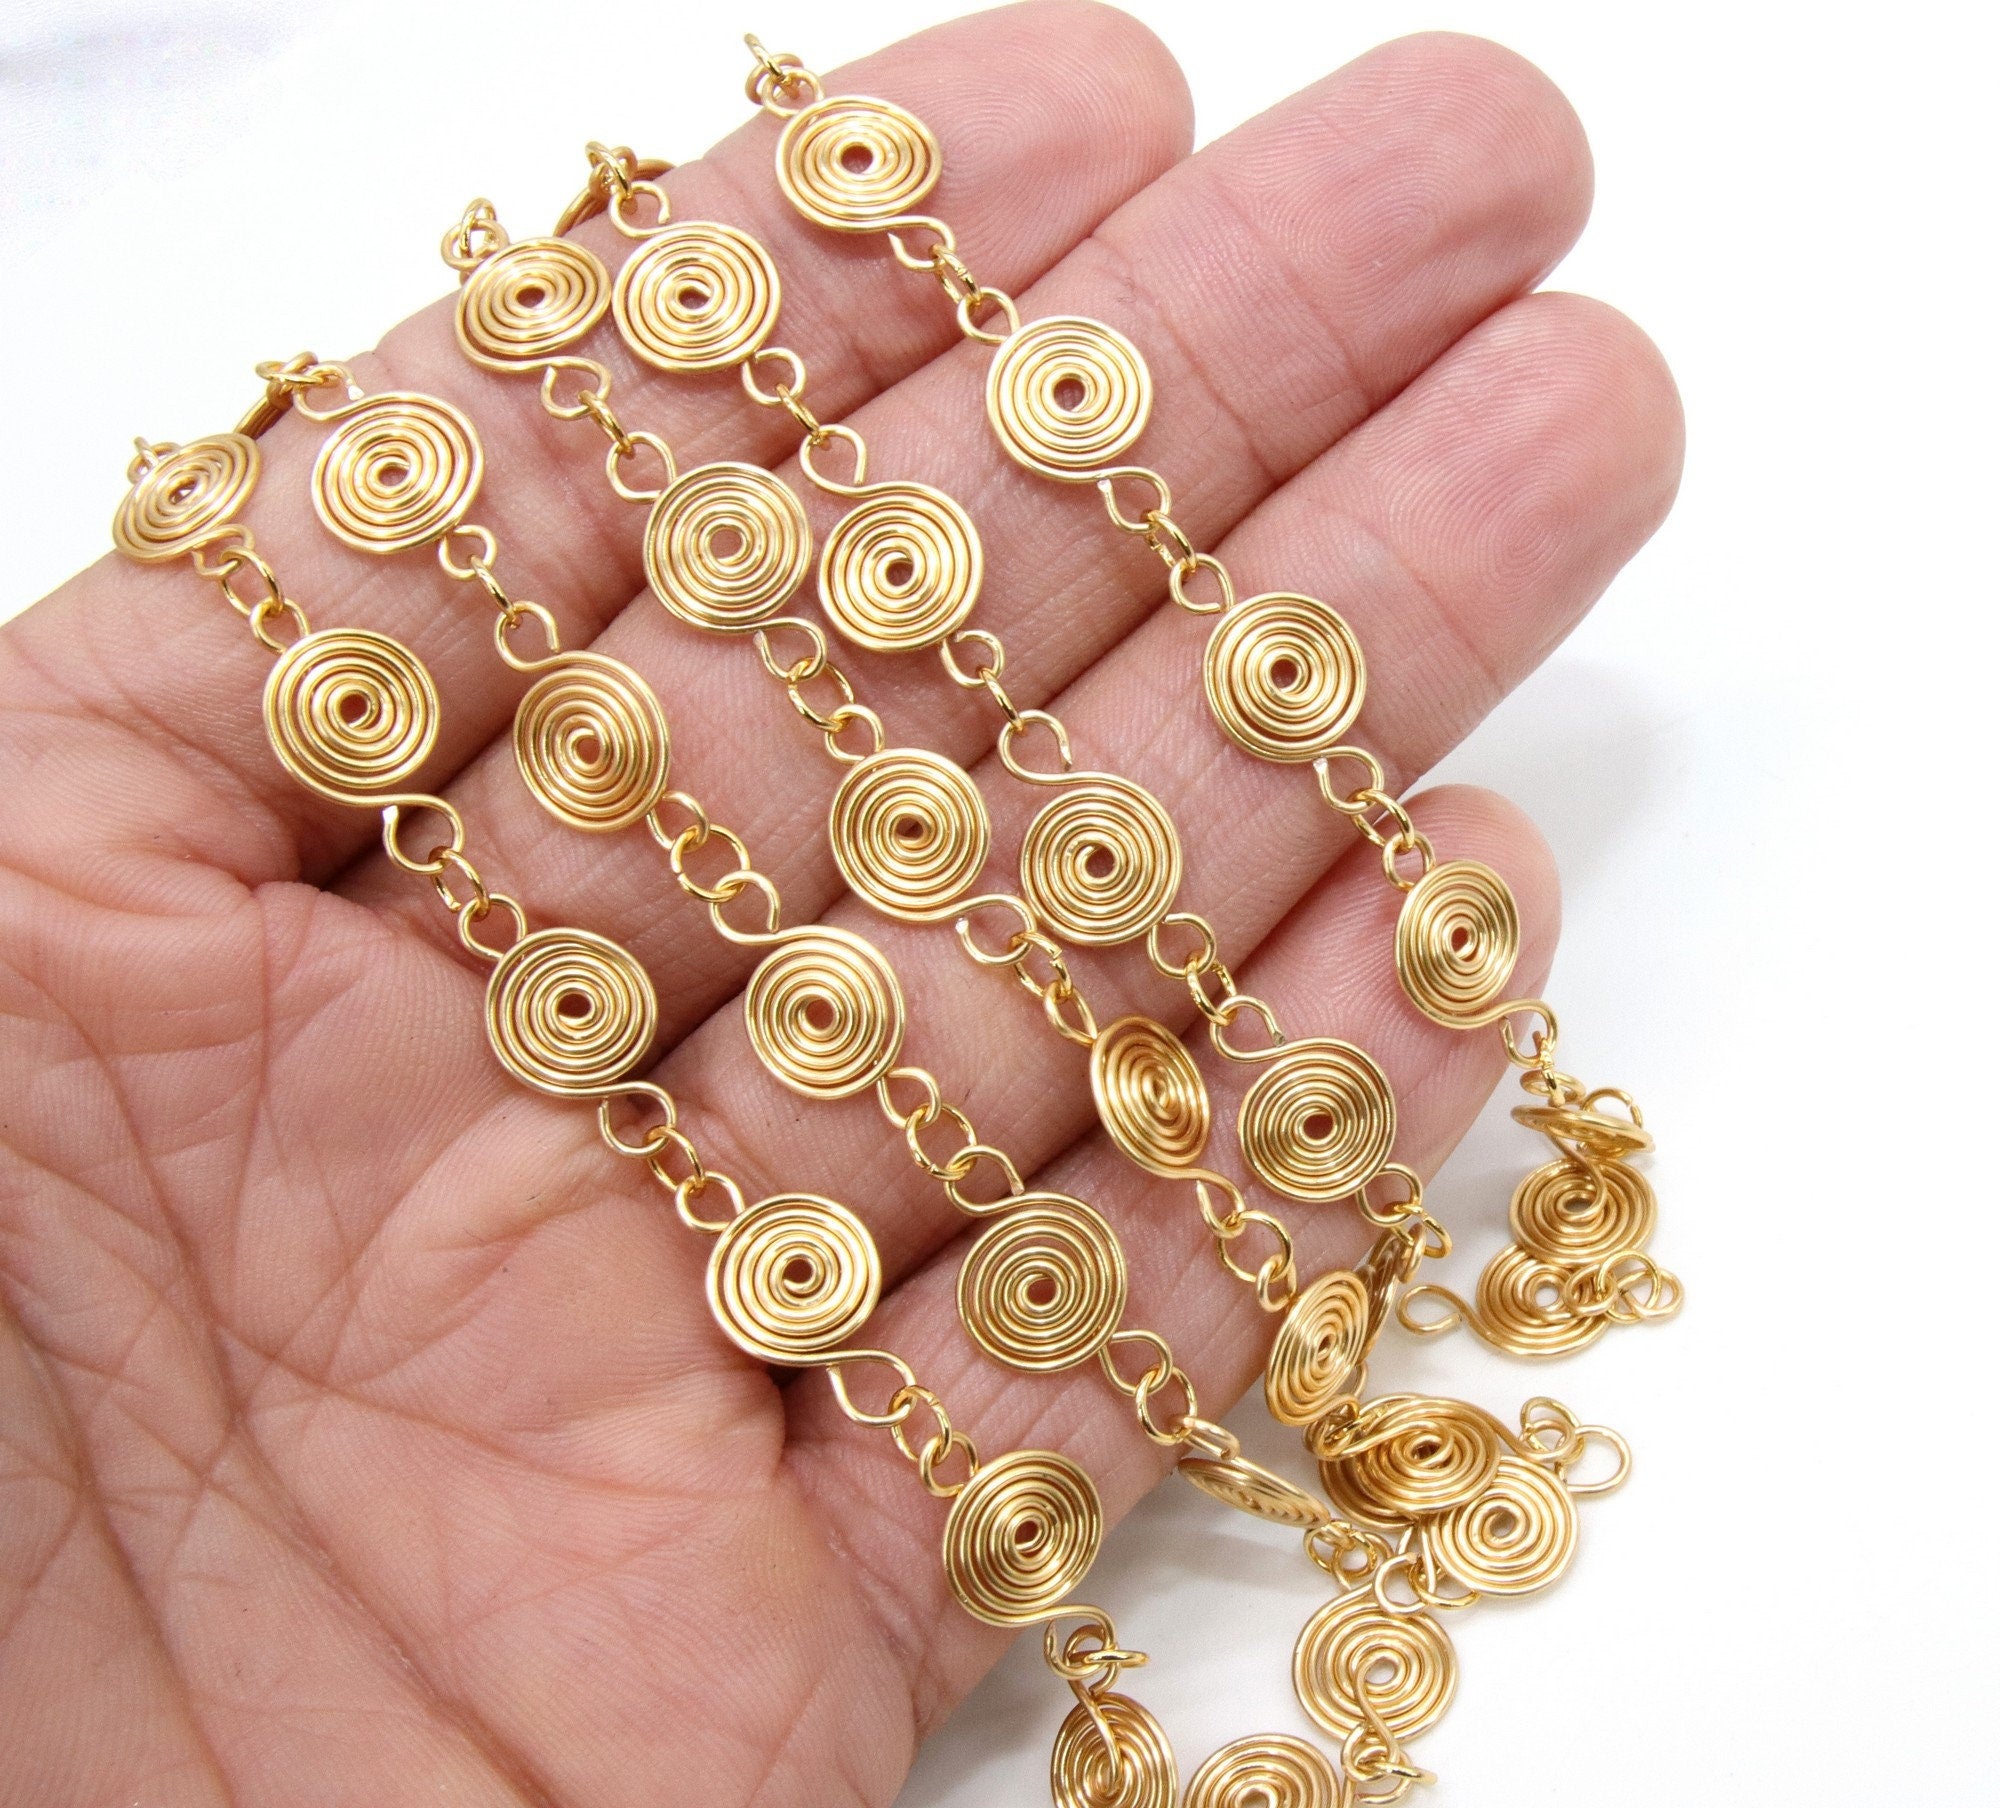 Gold Round Spiral Unfinished Chain Links, Brass Circle Linking Chains for Bracelets or Metal Necklace, 10 mm - A Girls Gems